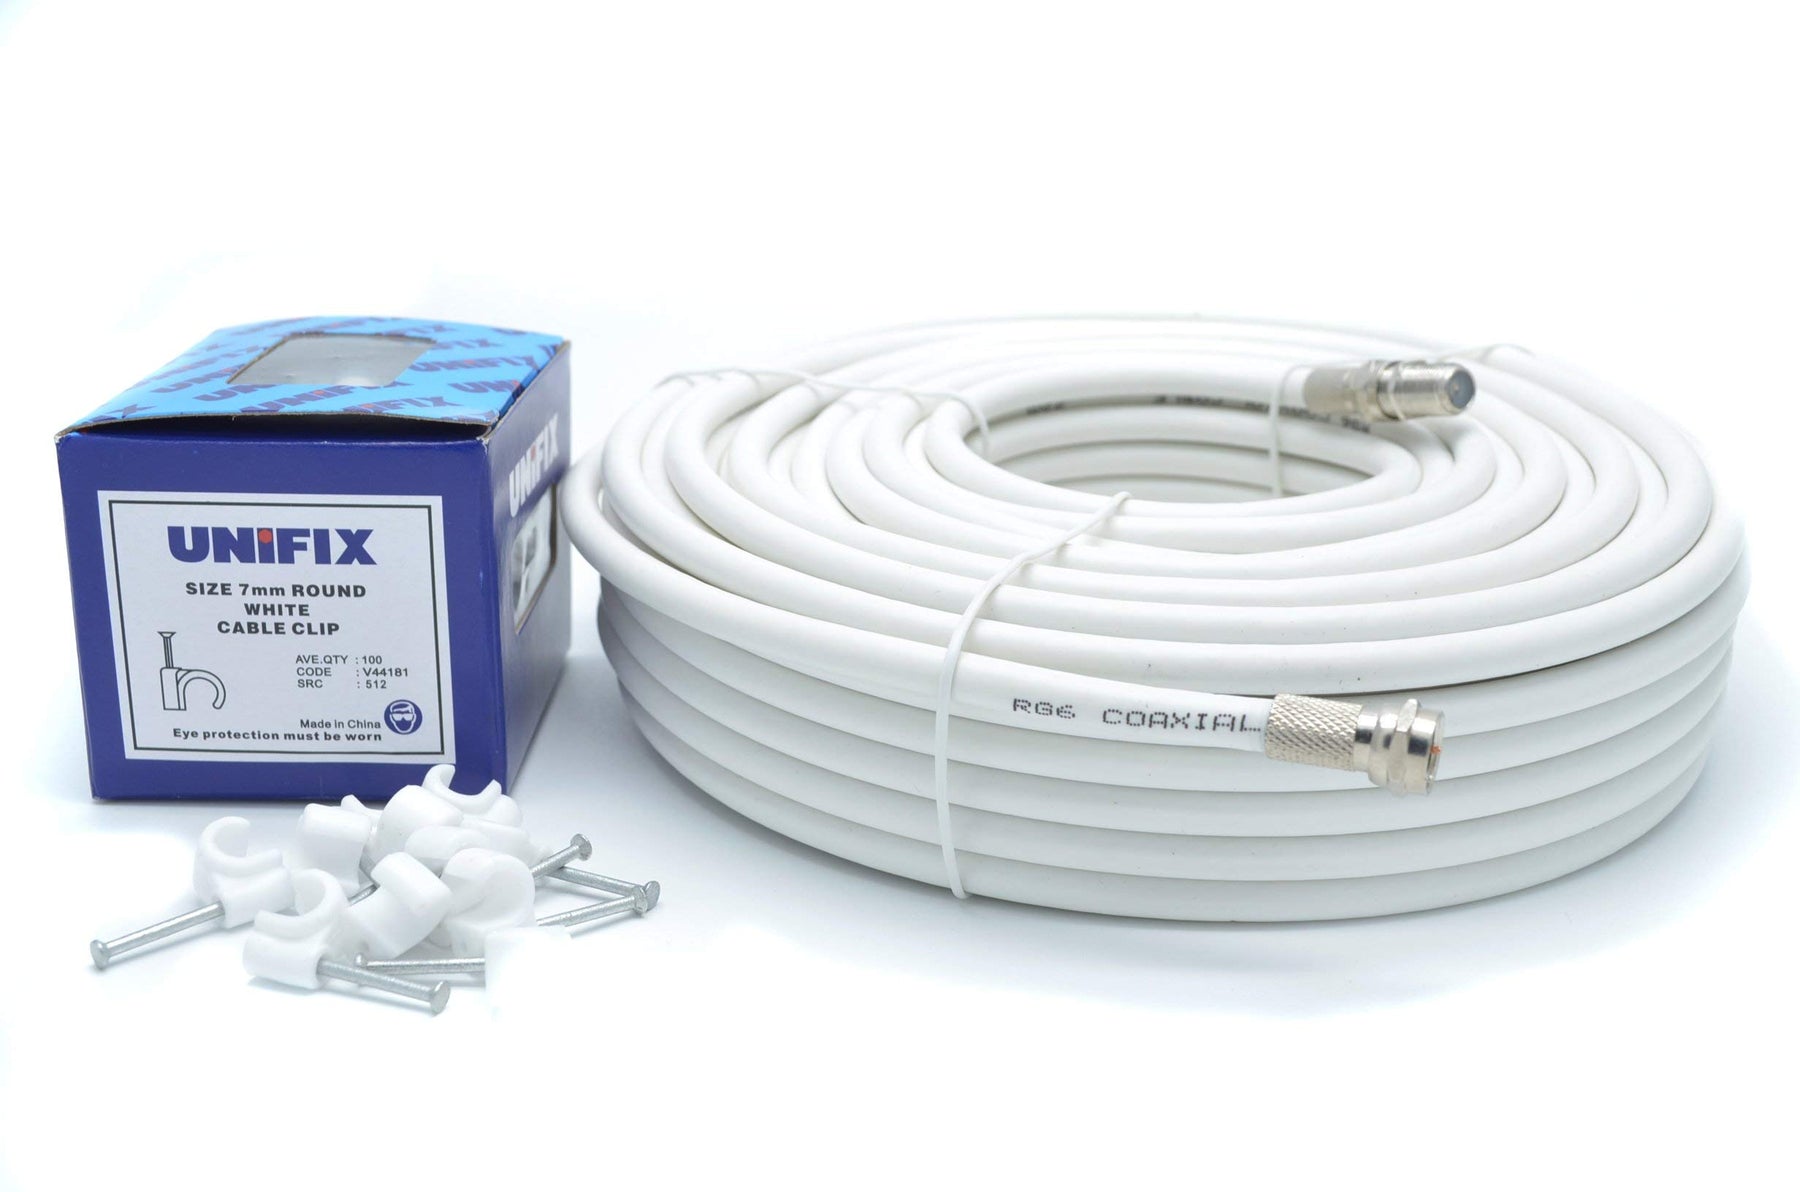 Viewi 100 Meter RG6 Satellite TV Coax Cable Extension Kit with Fitted F Connectors for Sky HD, Freesat & Virgin - White (100 Meter, White)